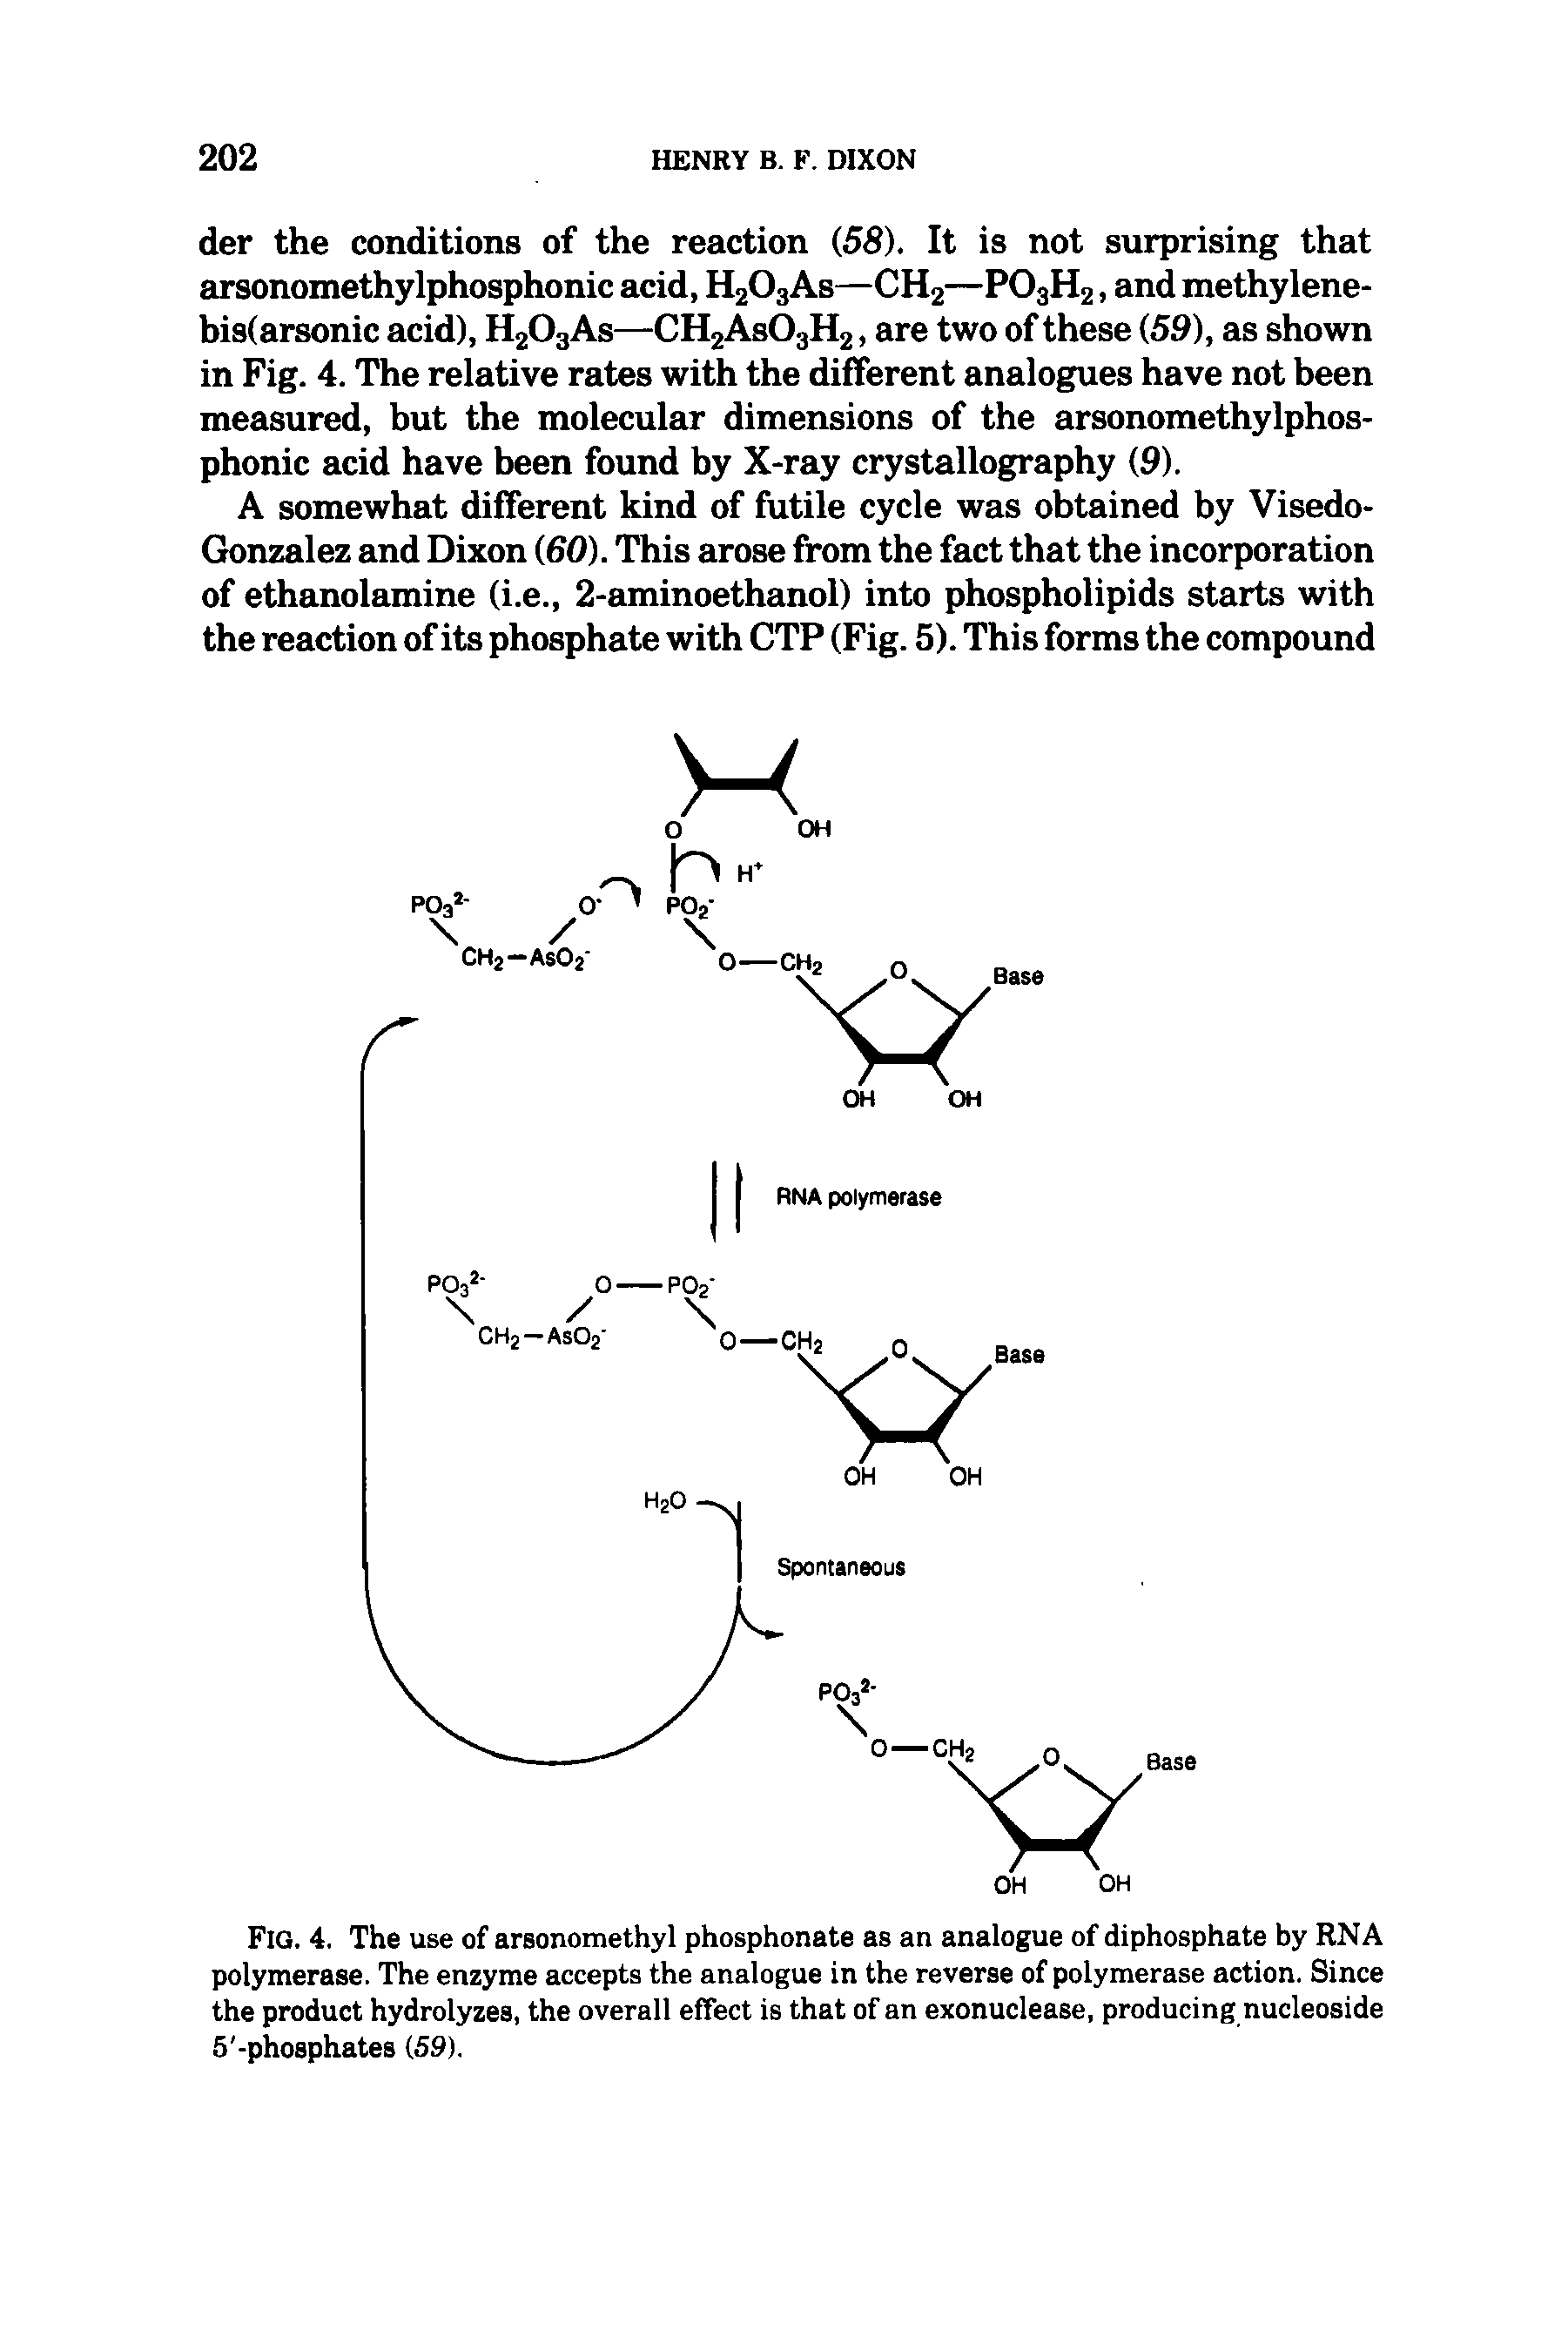 Fig. 4. The use of arsonomethyl phosphonate as an analogue of diphosphate by RNA polymerase. The enzyme accepts the analogue in the reverse of polymerase action. Since the product hydrolyzes, the overall effect is that of an exonuclease, producing nucleoside 5 -phosphates (59).